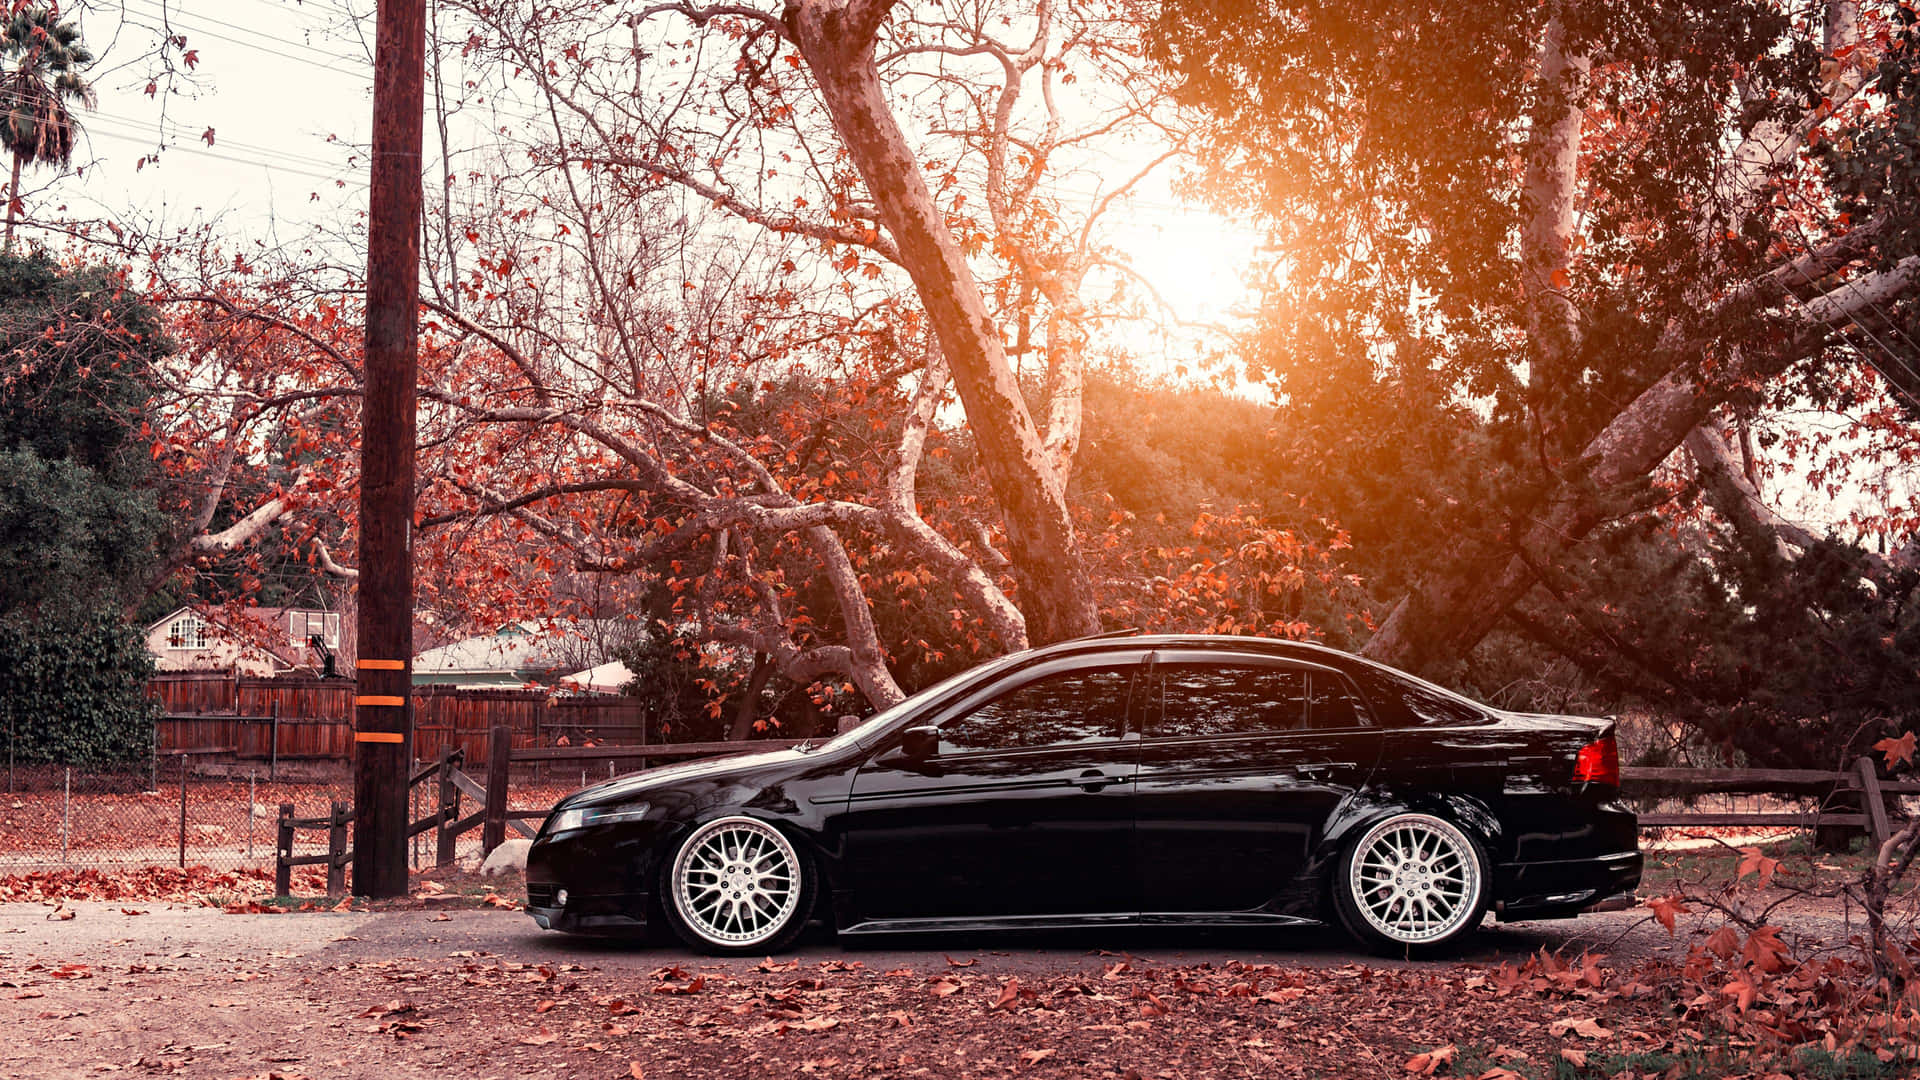 Acura TSX on the Road Wallpaper